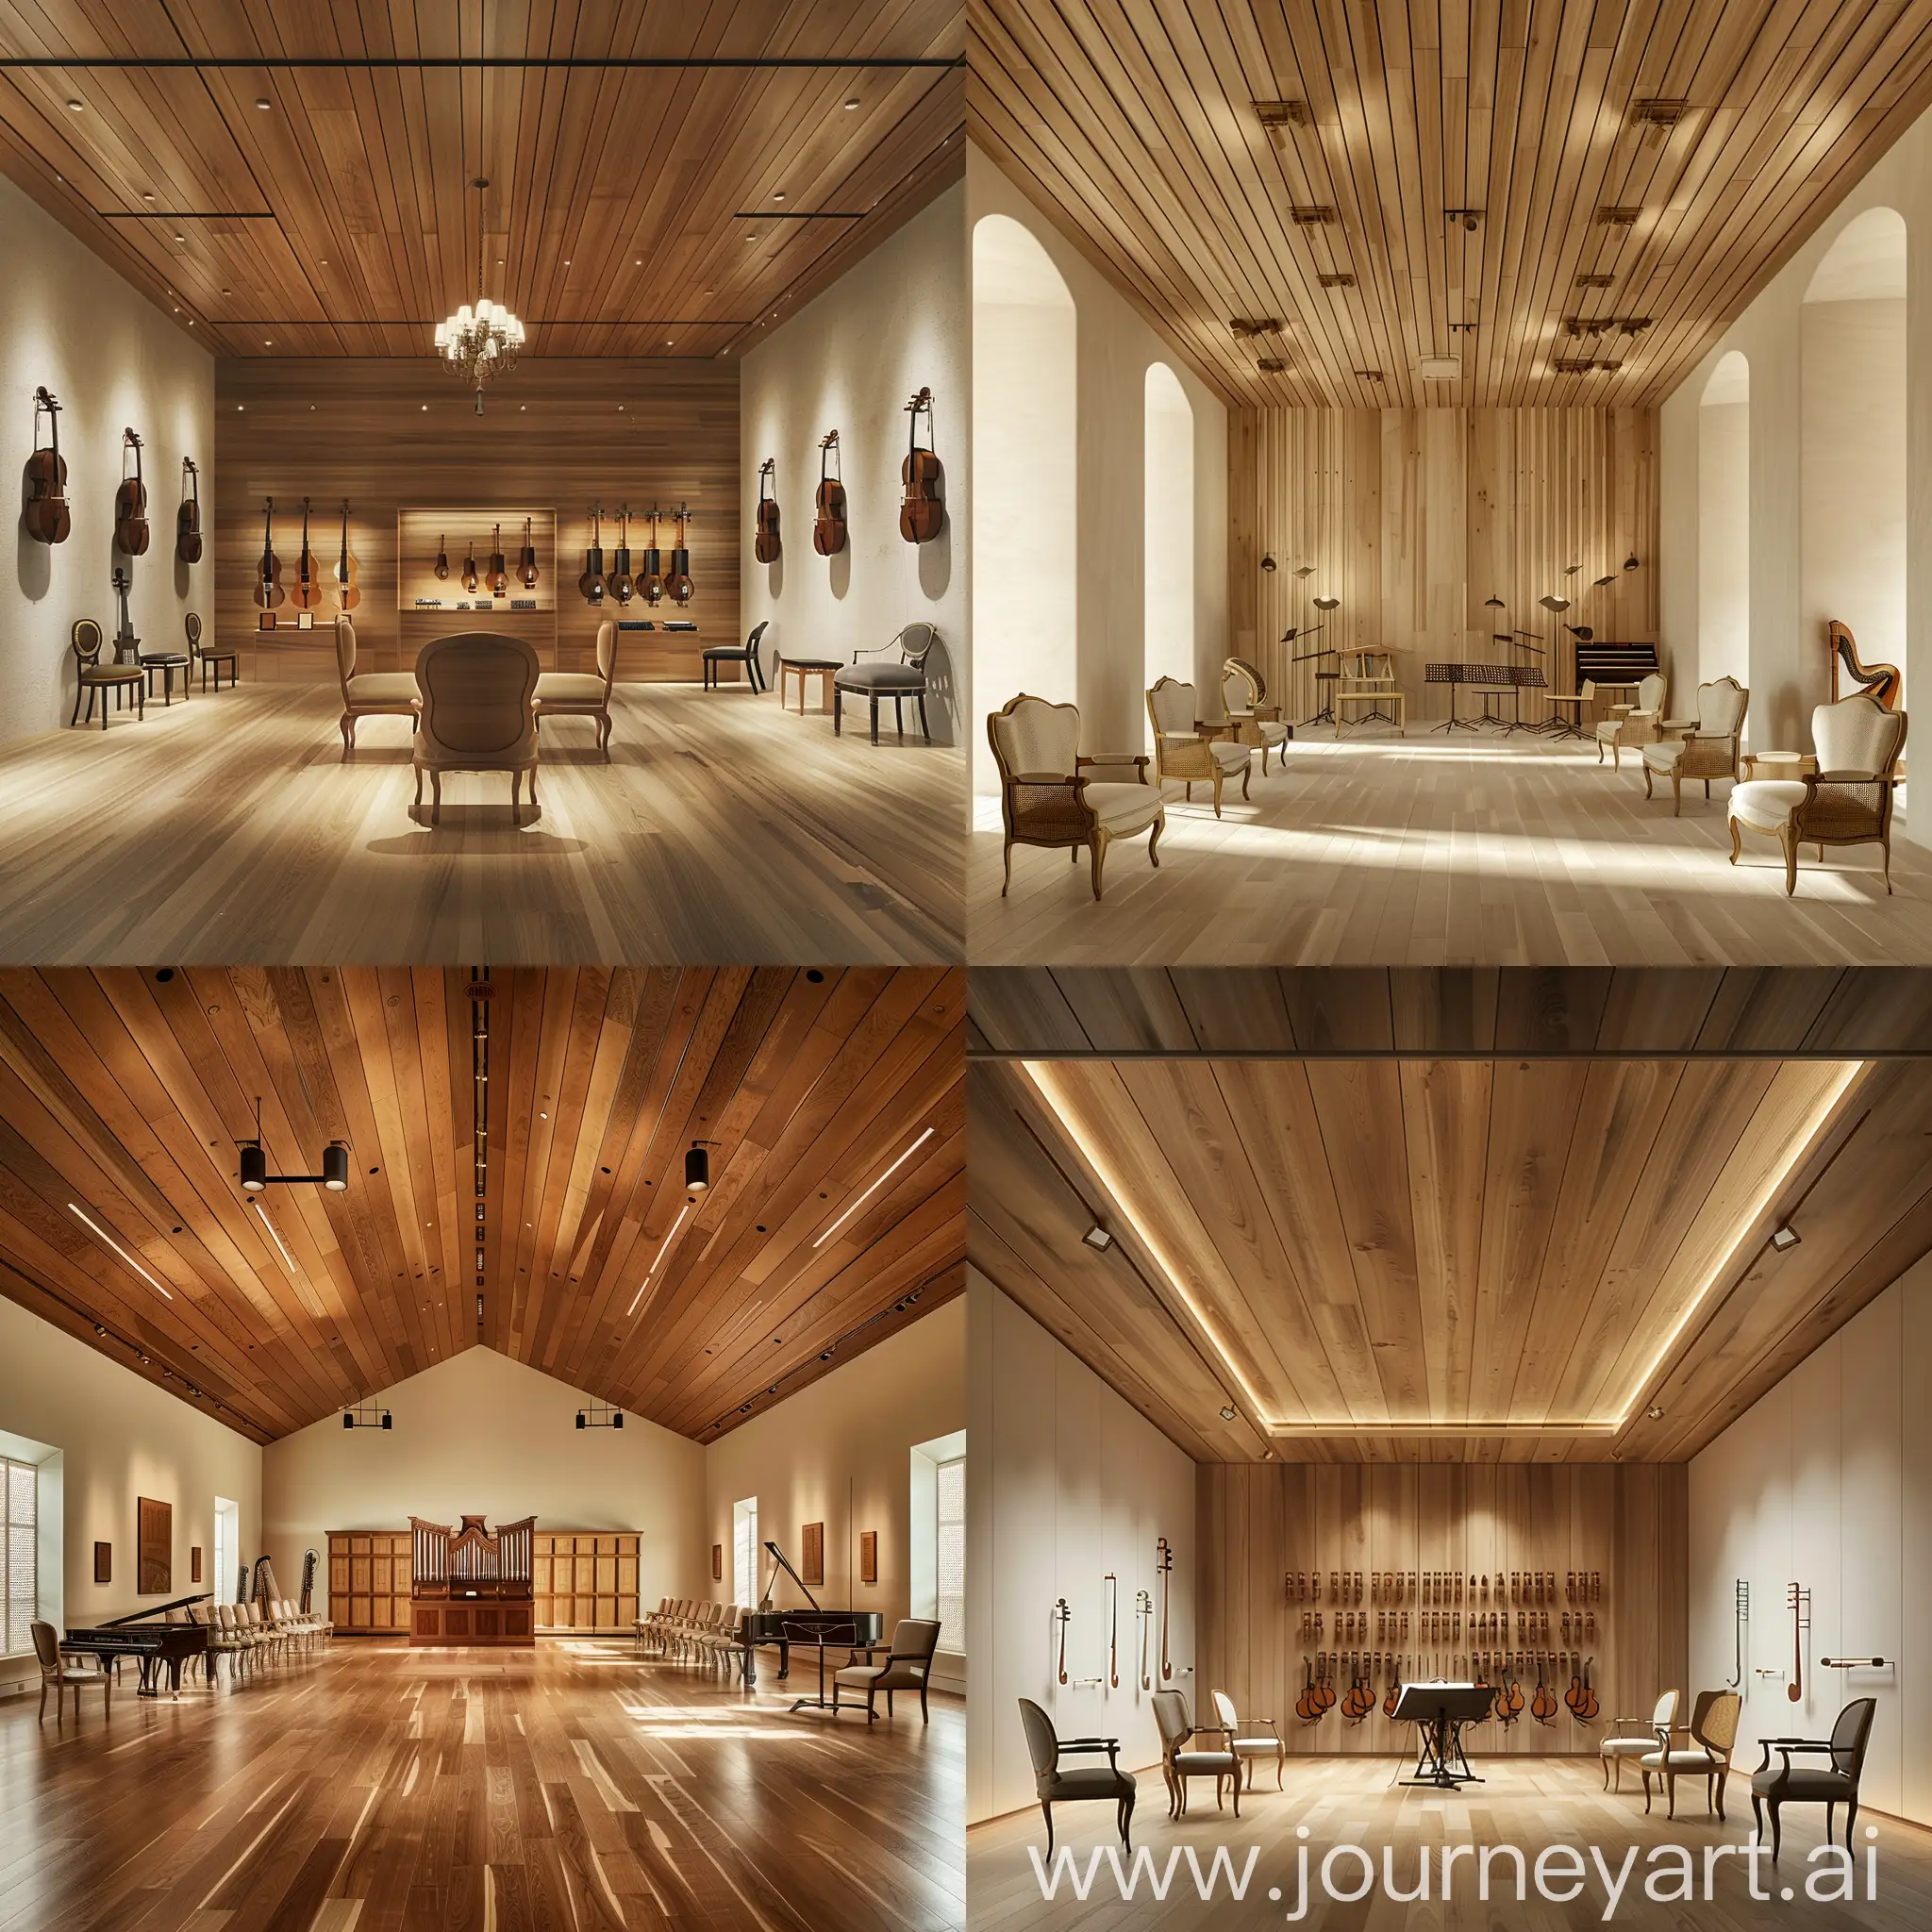 music museum , Music education hall , wood ceiling , classic chairs , music tools